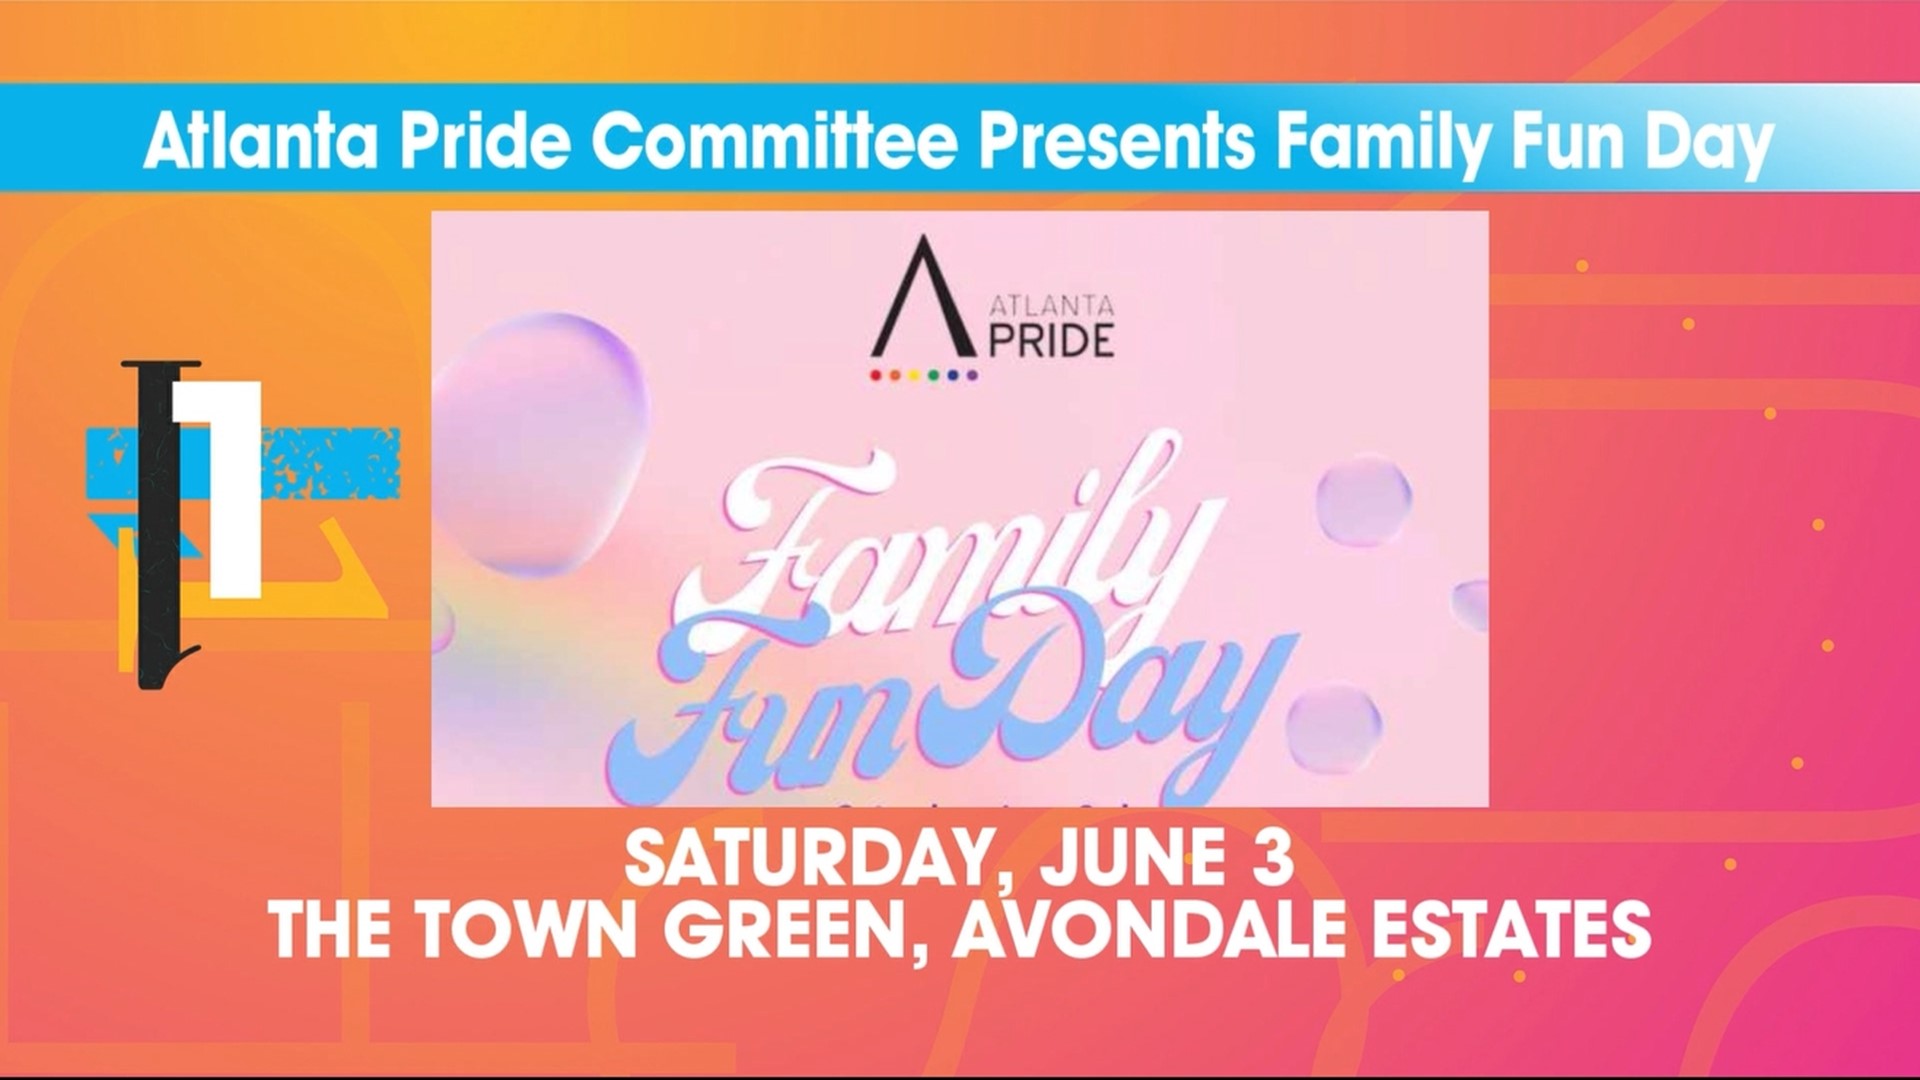 Kick off Pride Month with great local events this weekend and fun for the whole family.